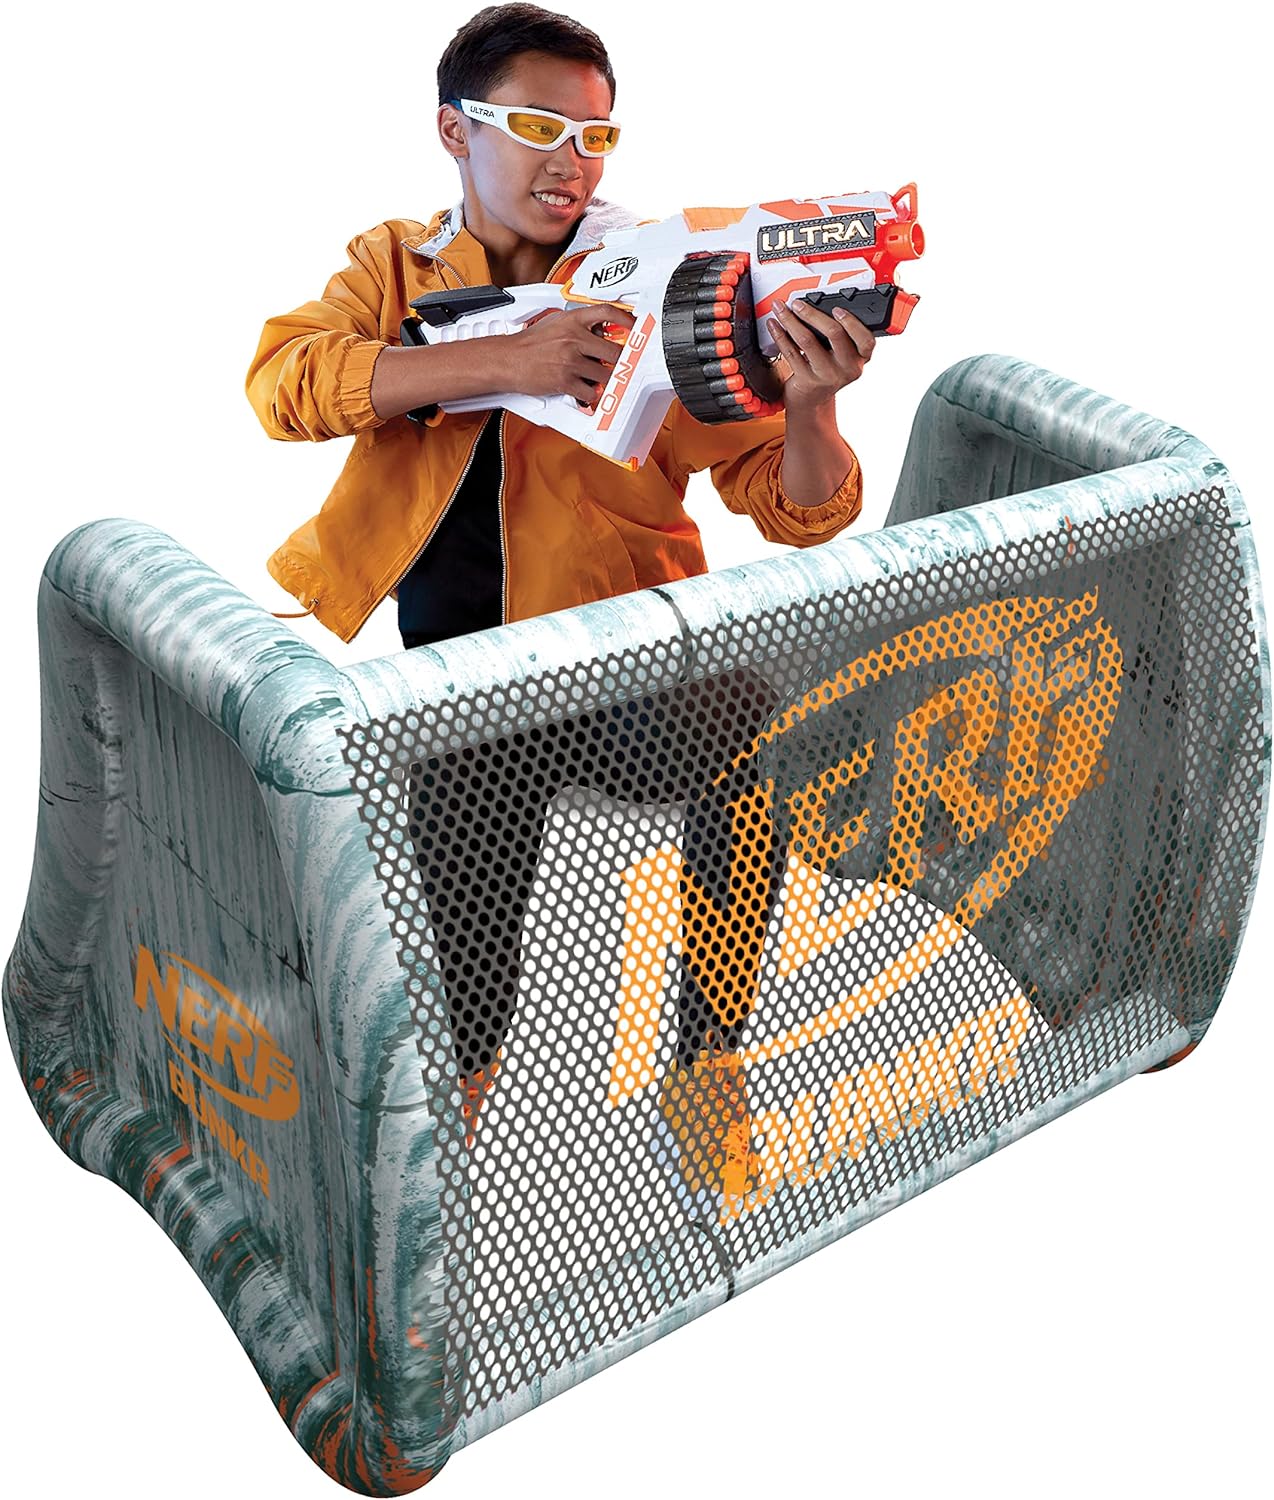 Nerf Bunkr Officially Licensed Battle Fort Inflatable Bunker Barricade Wall - Perfect for Nerf Party Nerf War, Multicolor